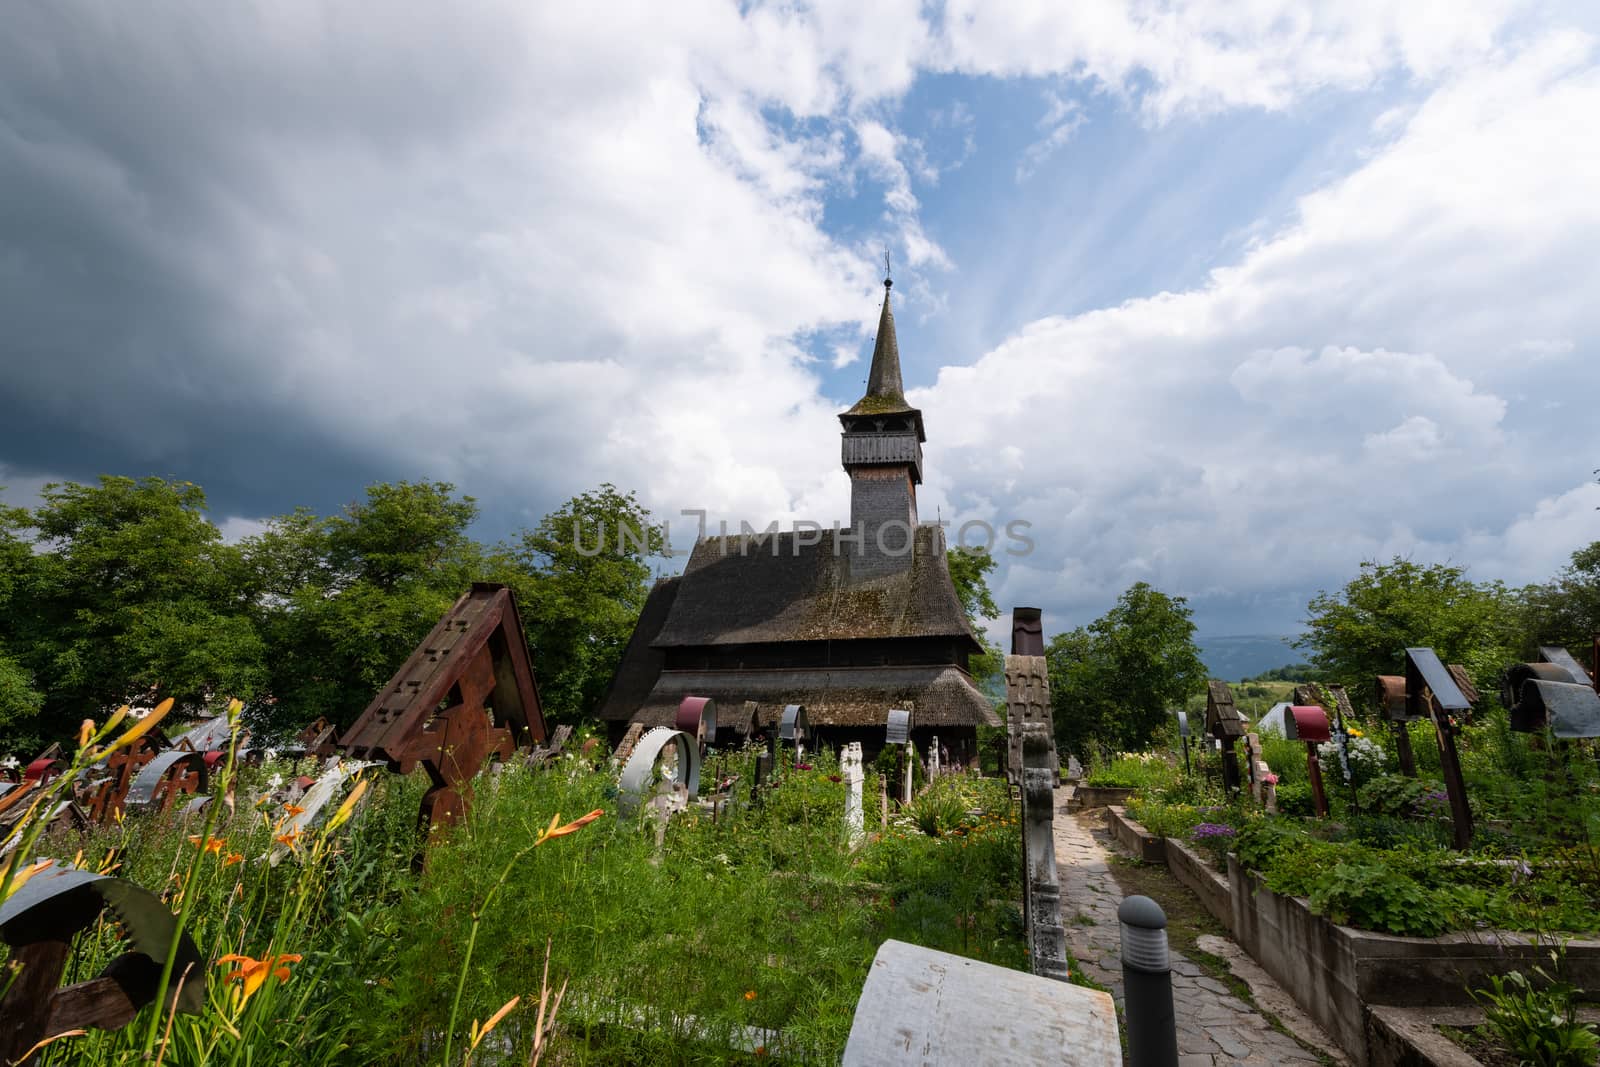 Ieud Hill Church and its graveyard, the oldest wood church in Maramures, Romania under dramatic sky. The Church belongs to a collection of Wooden Churches of Maramures, UNESCO World Heritage Site.